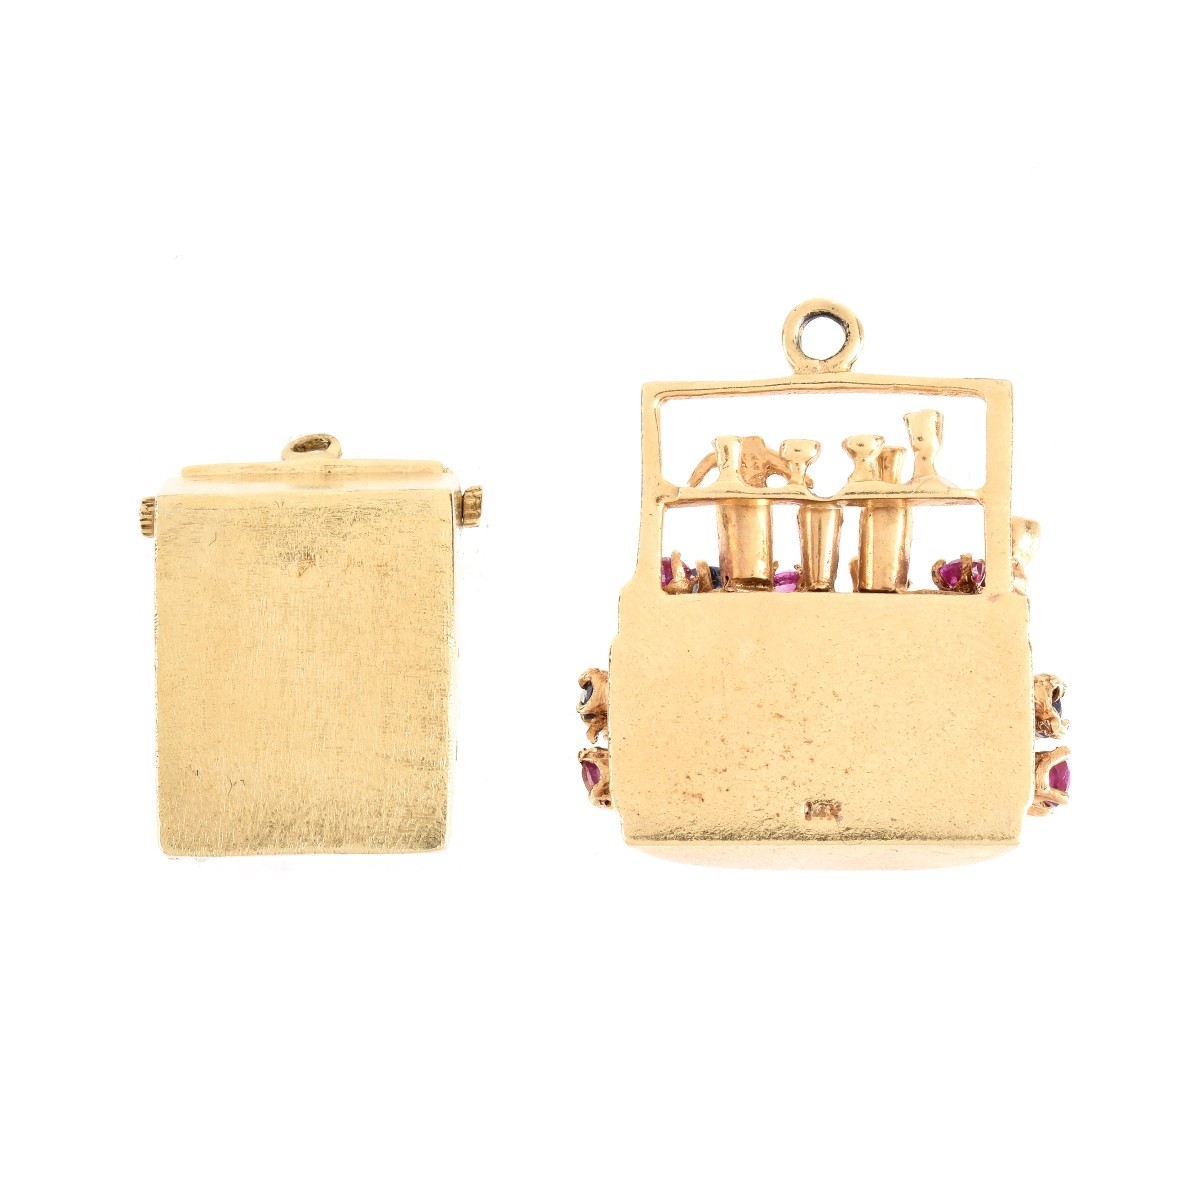 Two Vintage 14K and Gemstone Charms